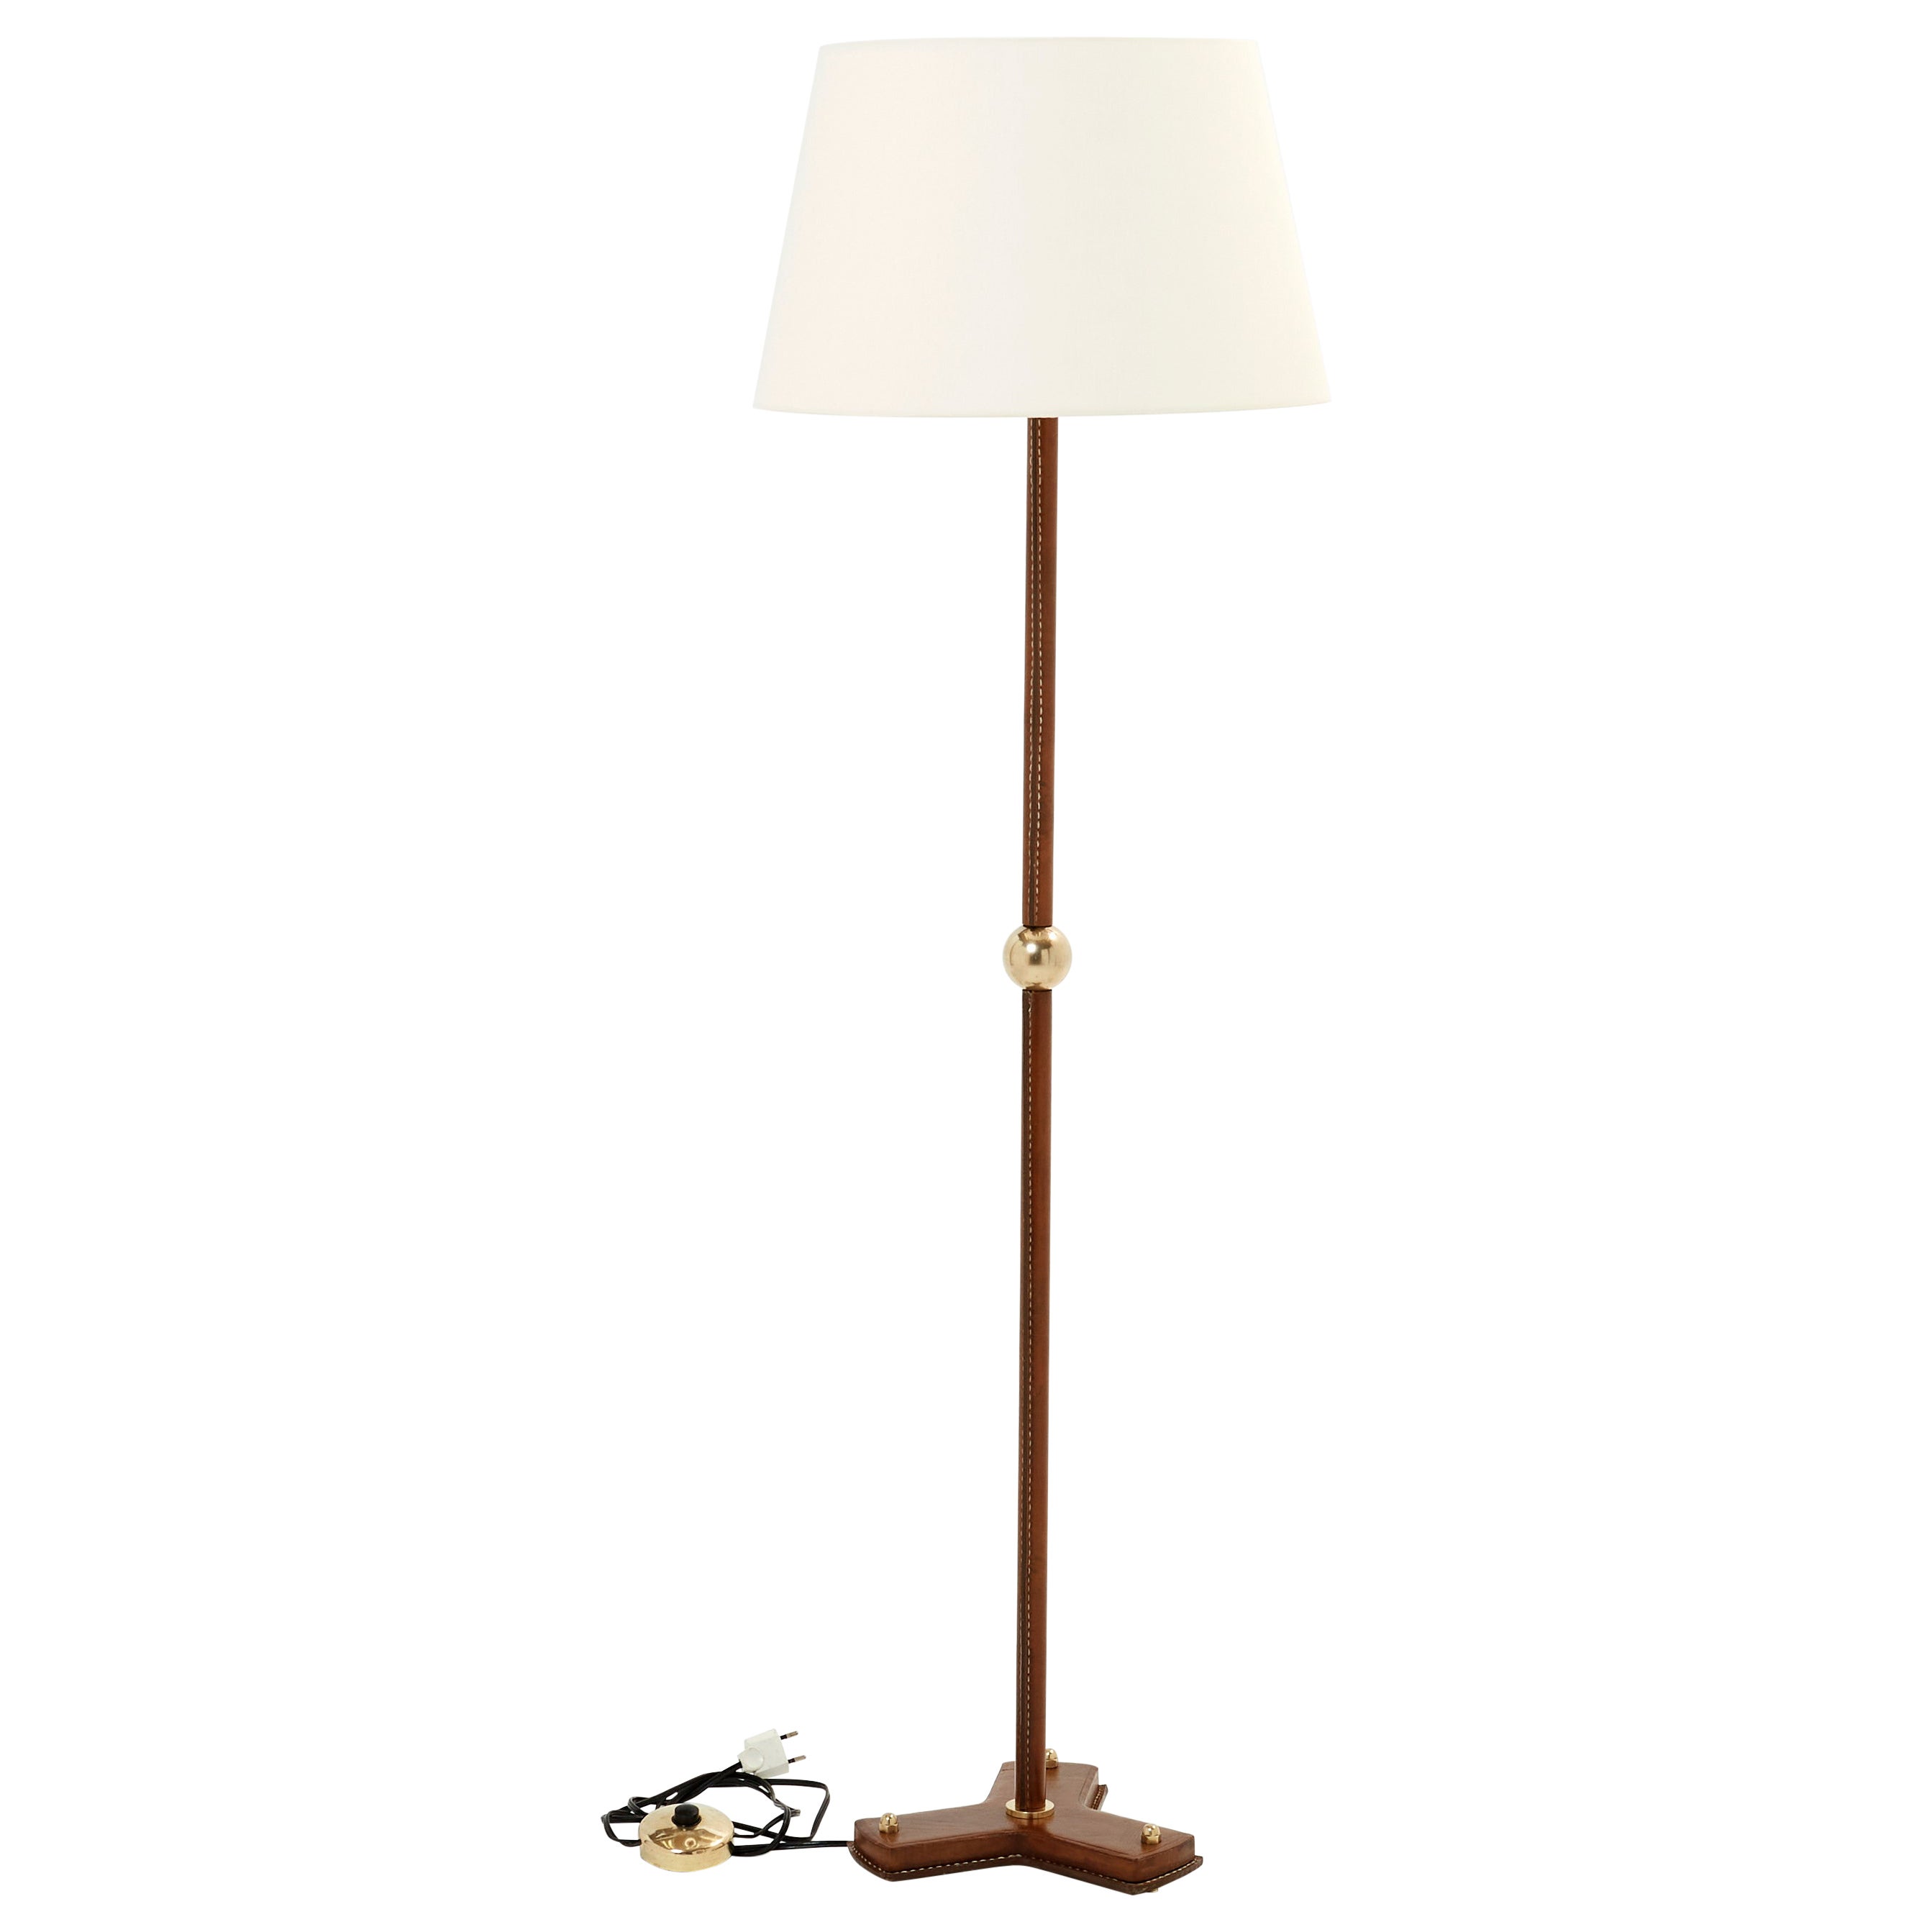 Jacques Adnet Modernist Stitched Brown Leather Floor Lamp 1950s For Sale